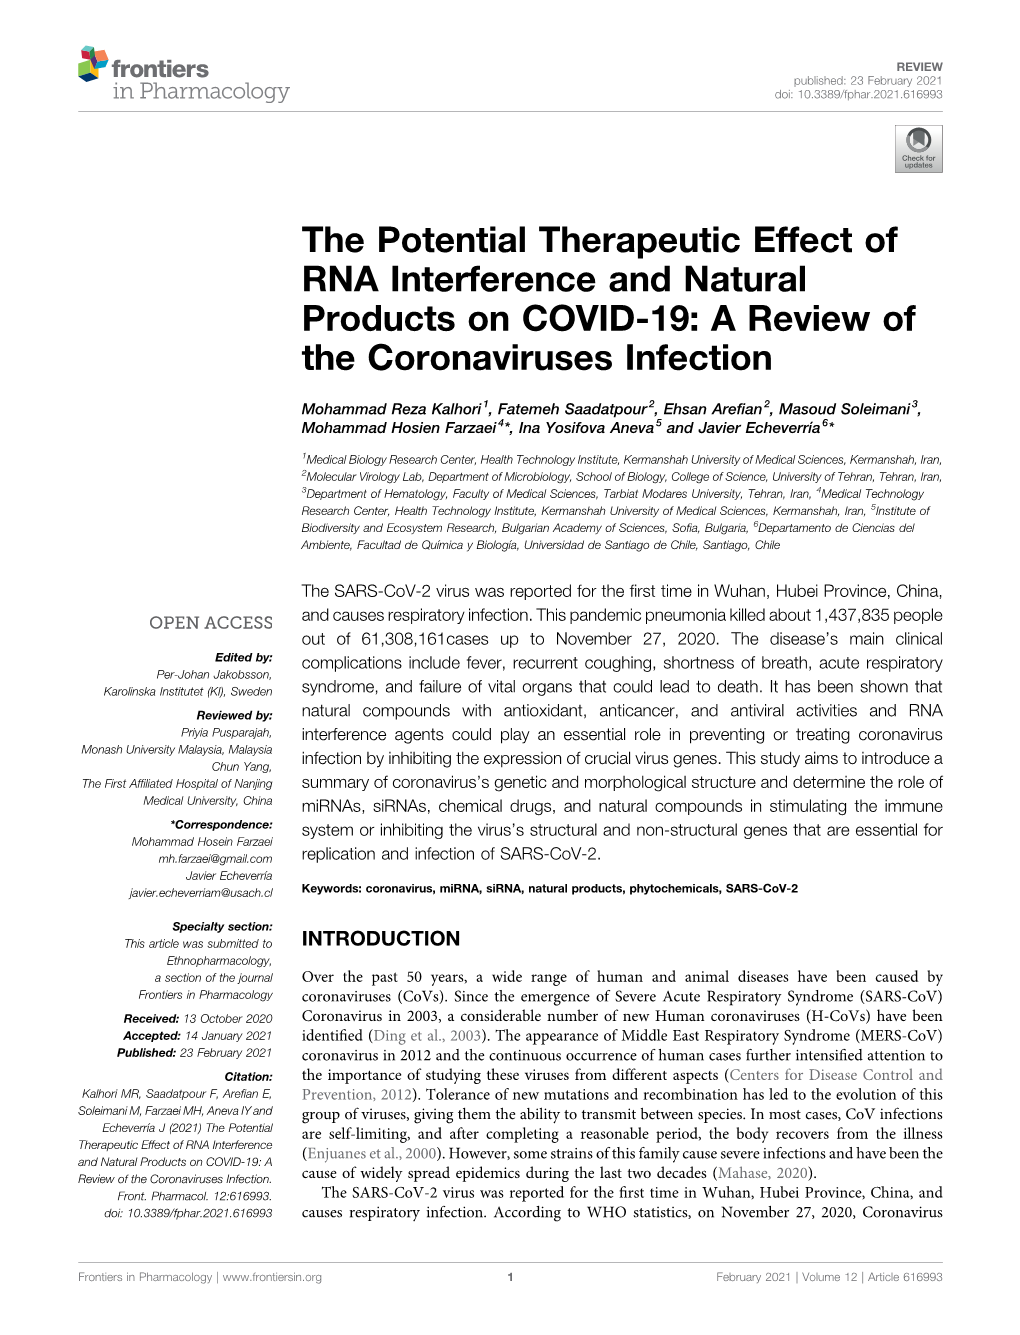 A Review of the Coronaviruses Infection